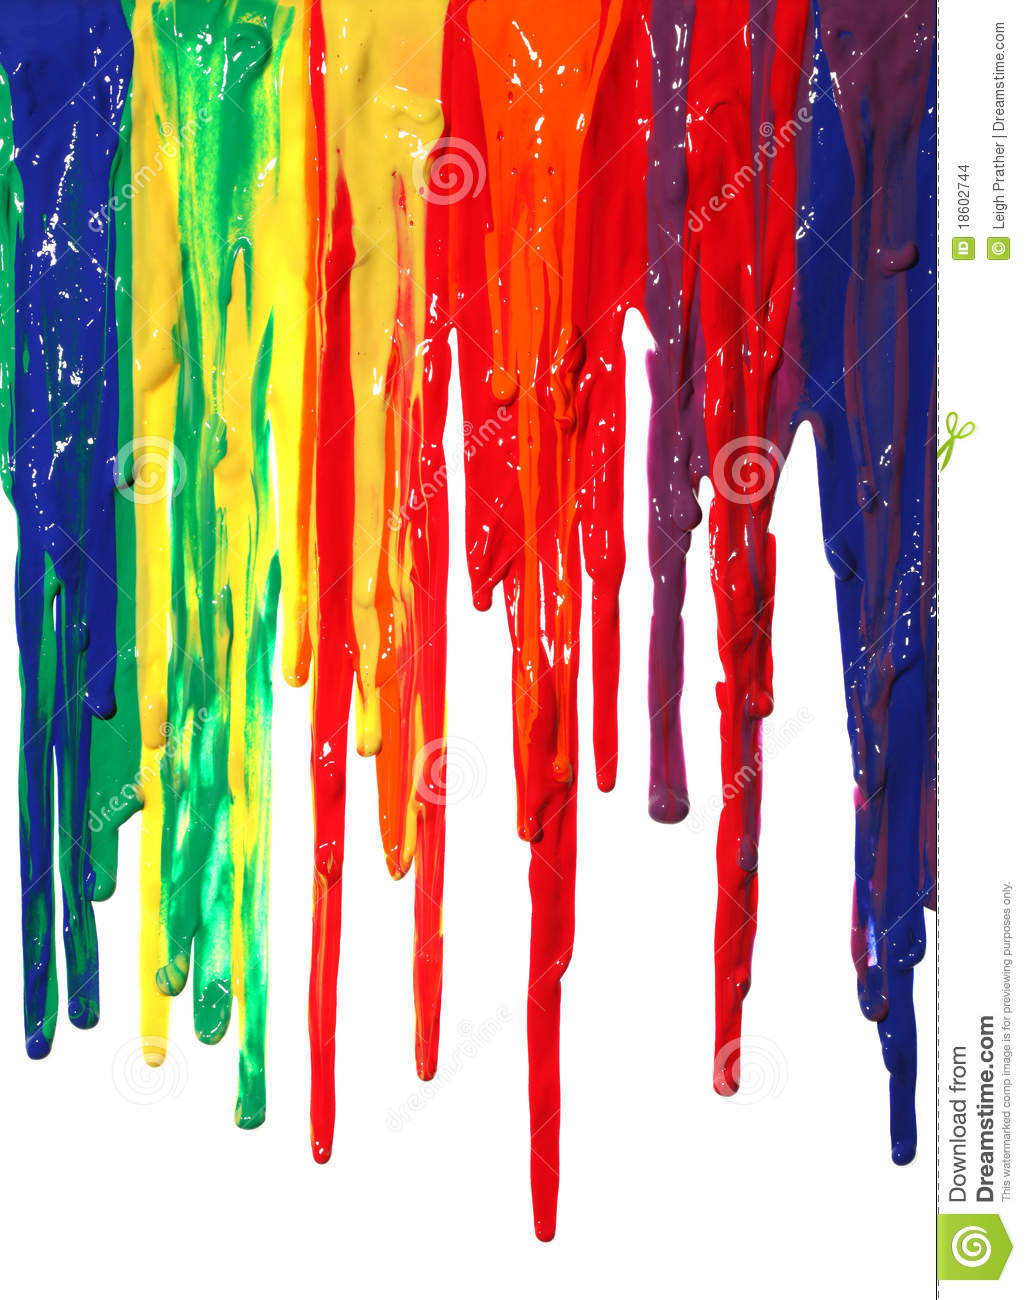 Paint Dripping Stock Images   Image  18602744